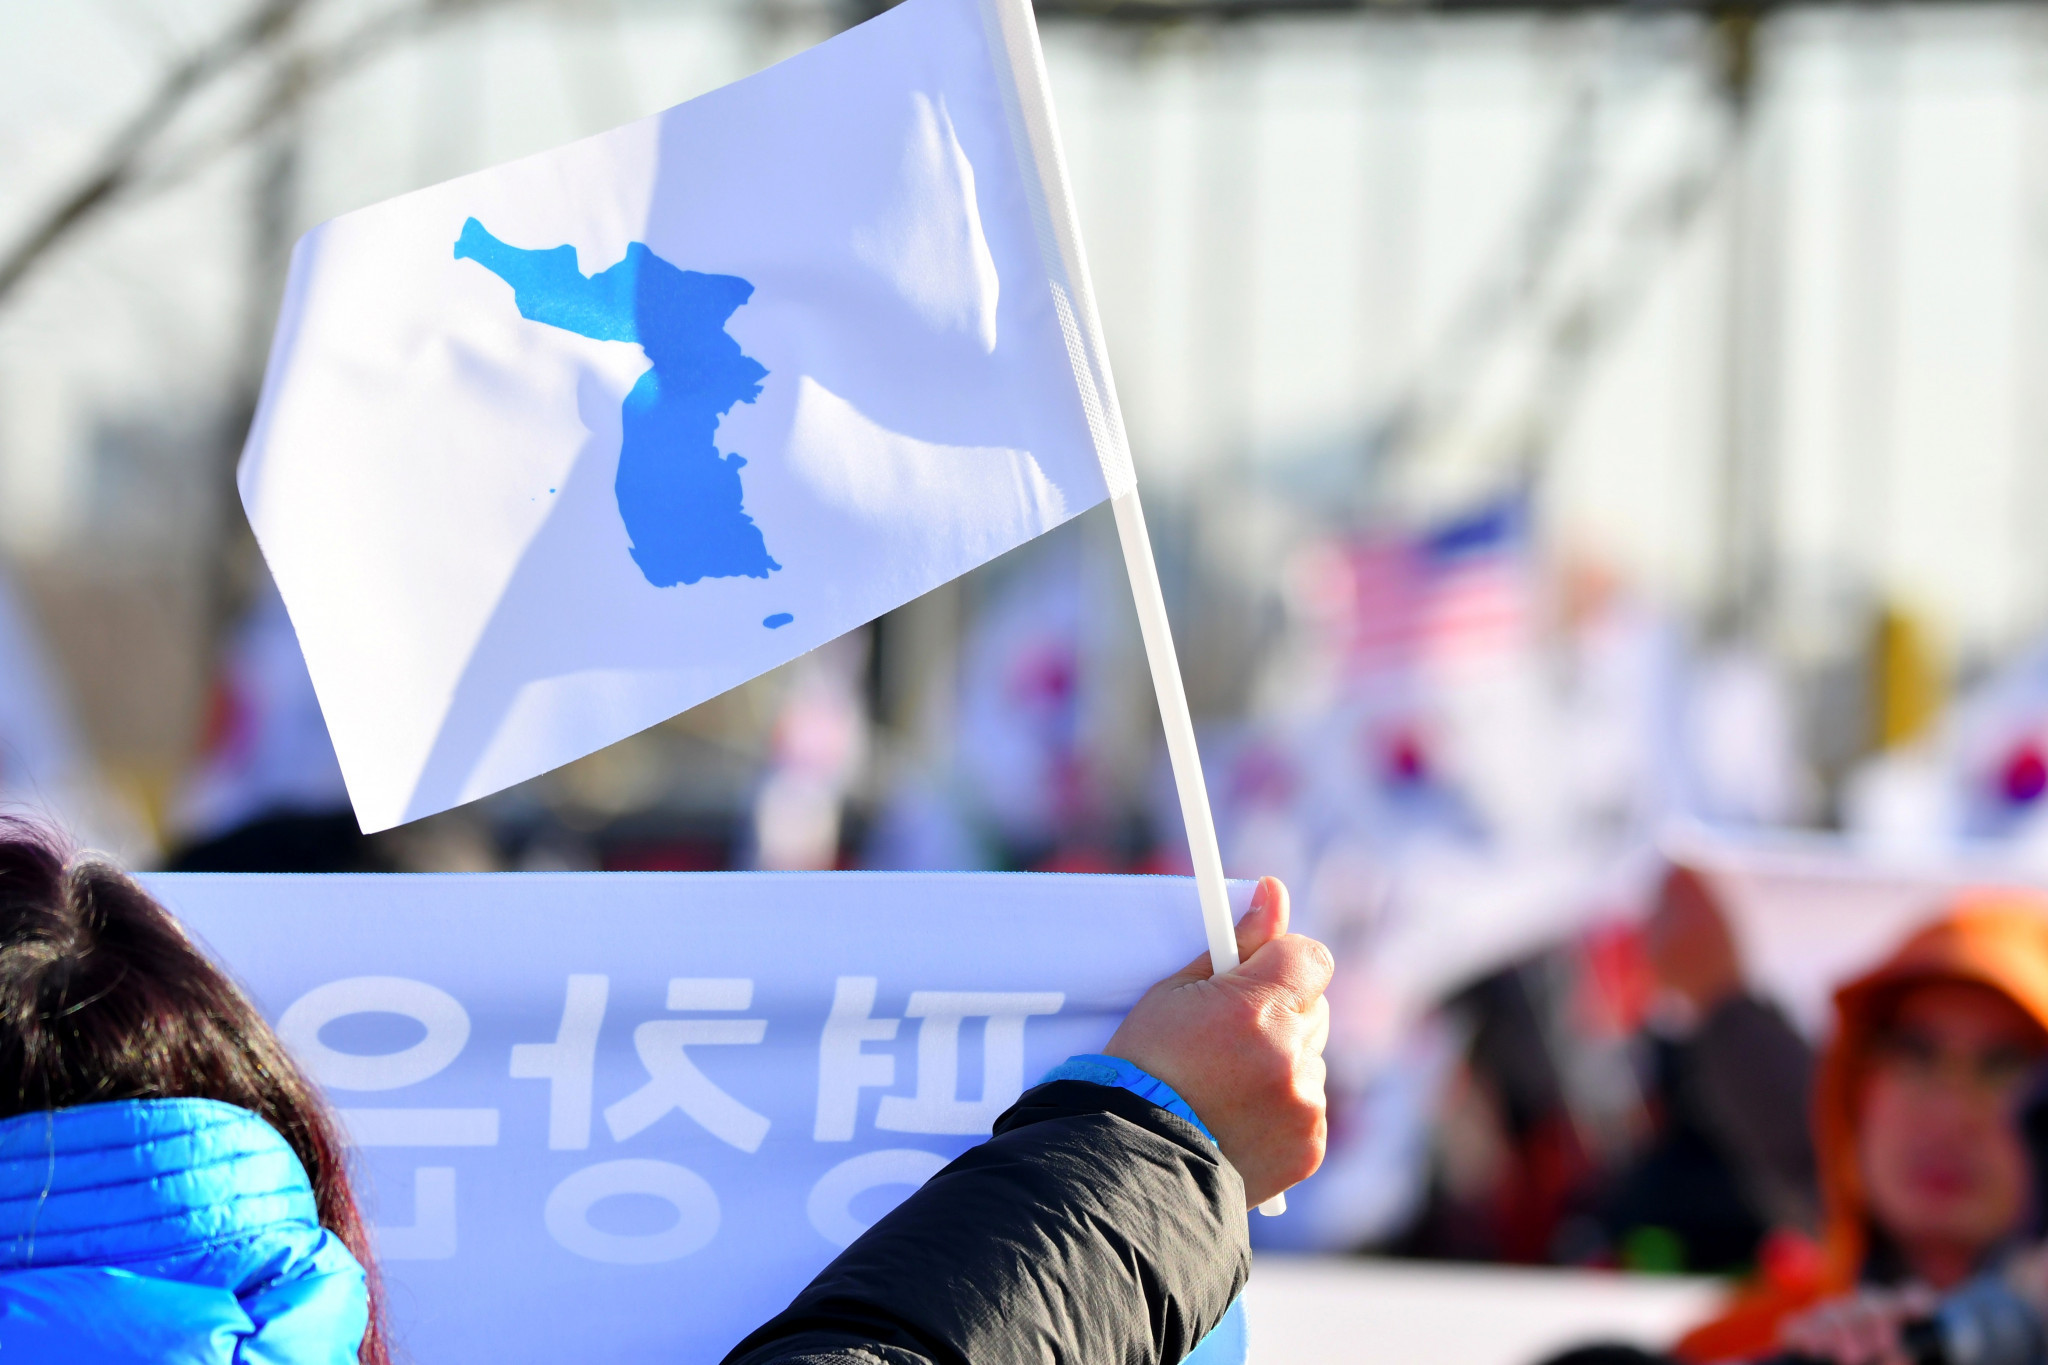 A spectator waving the unified Korean flag in Incheon yesterday before their women's ice hockey team played Sweden in a warm-up match for Pyeongchang 2018 ©Getty Images